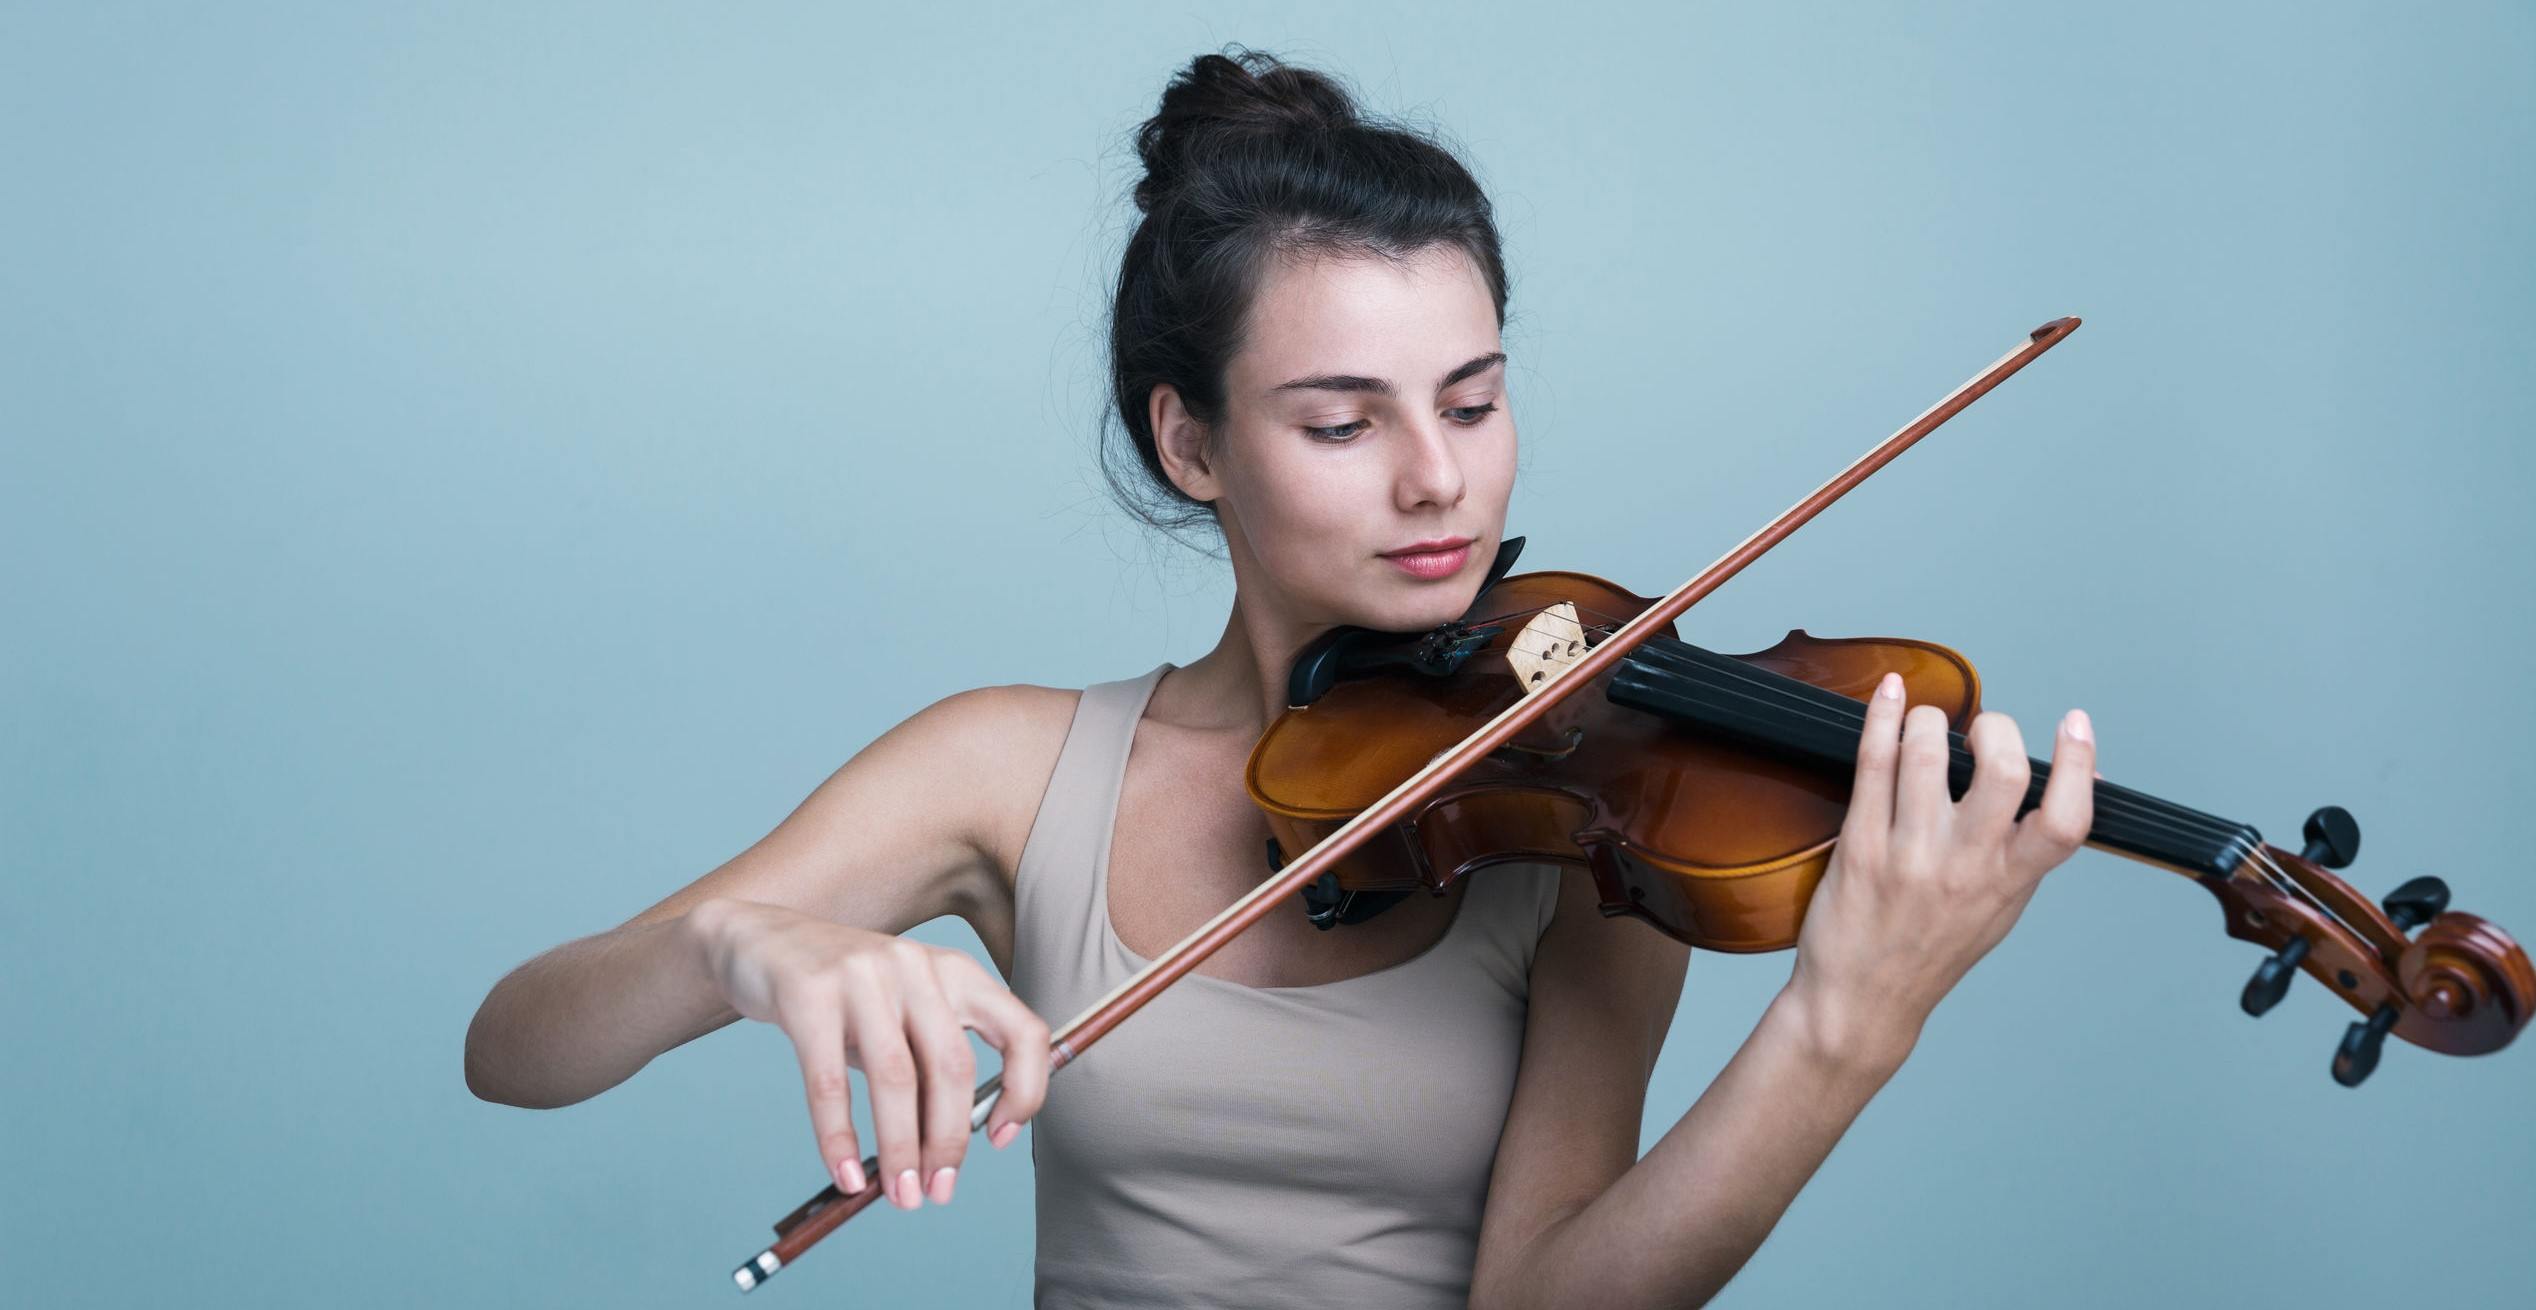 A pic of a violinist, who'd feel like an imposter if she had teammates.